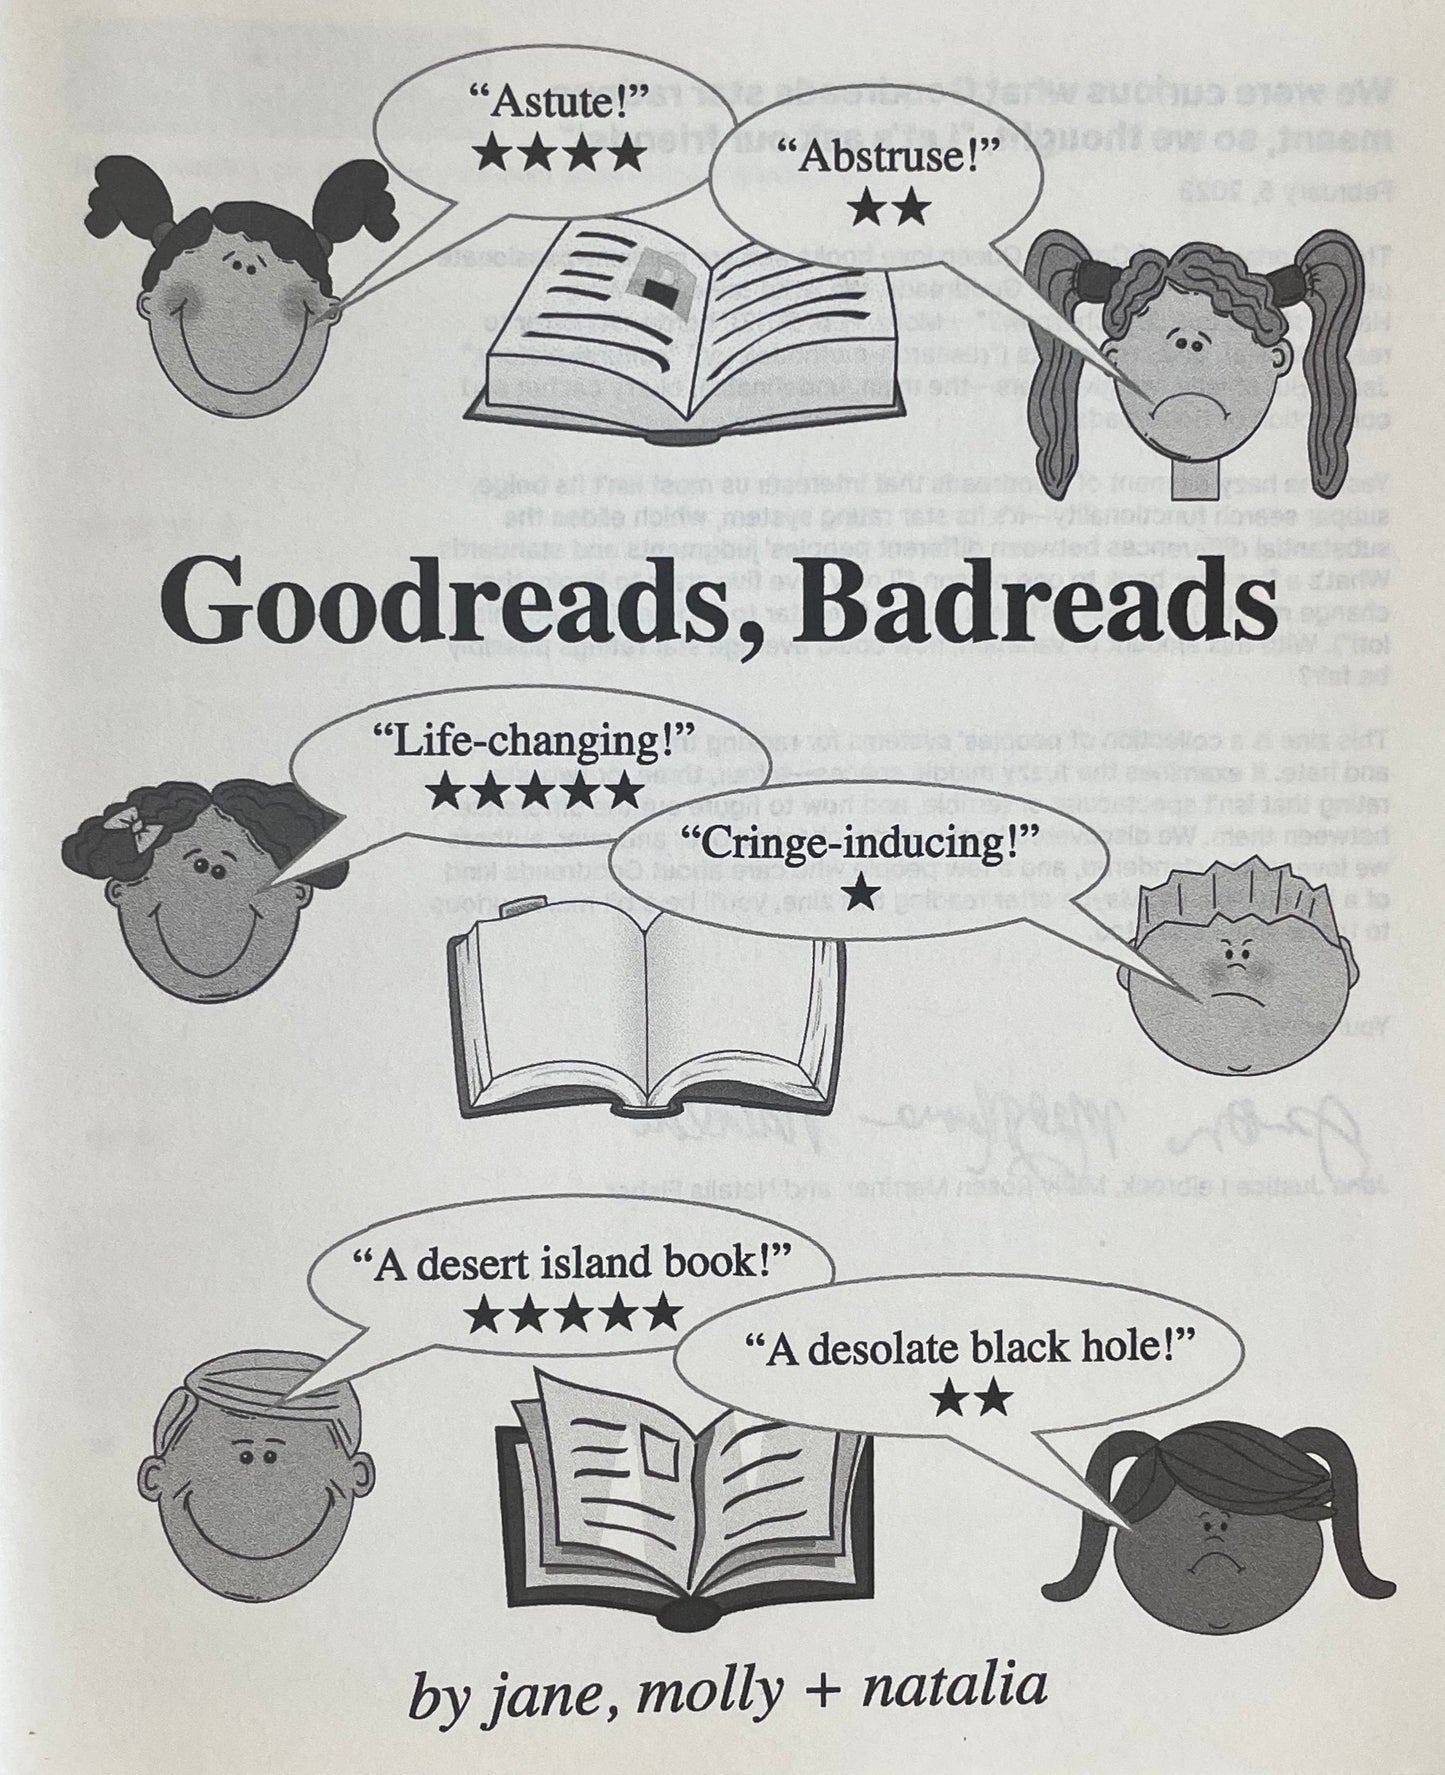 Goodreads, Badreads by Molly Rosen Marriner and Jane Leibrock and Natalia